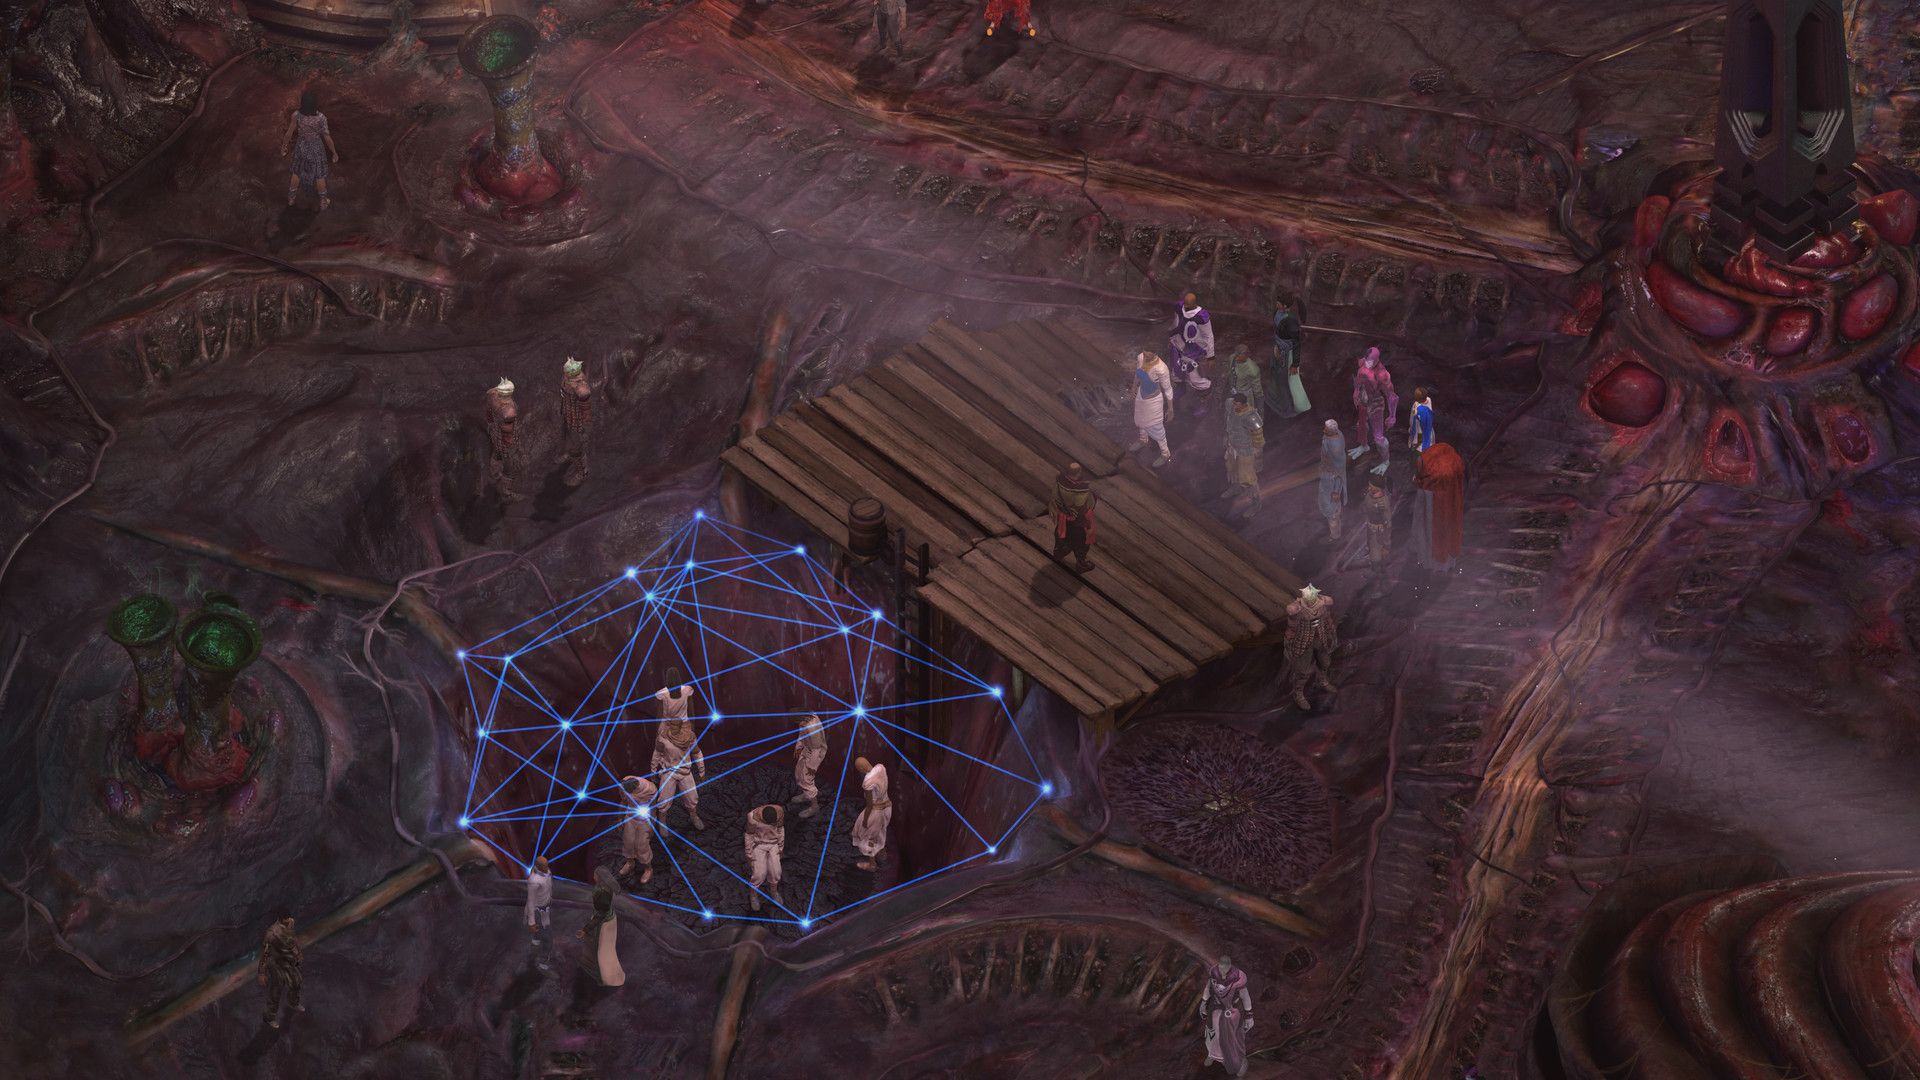 Torment Tides Of Numenera party looking at some prisoners